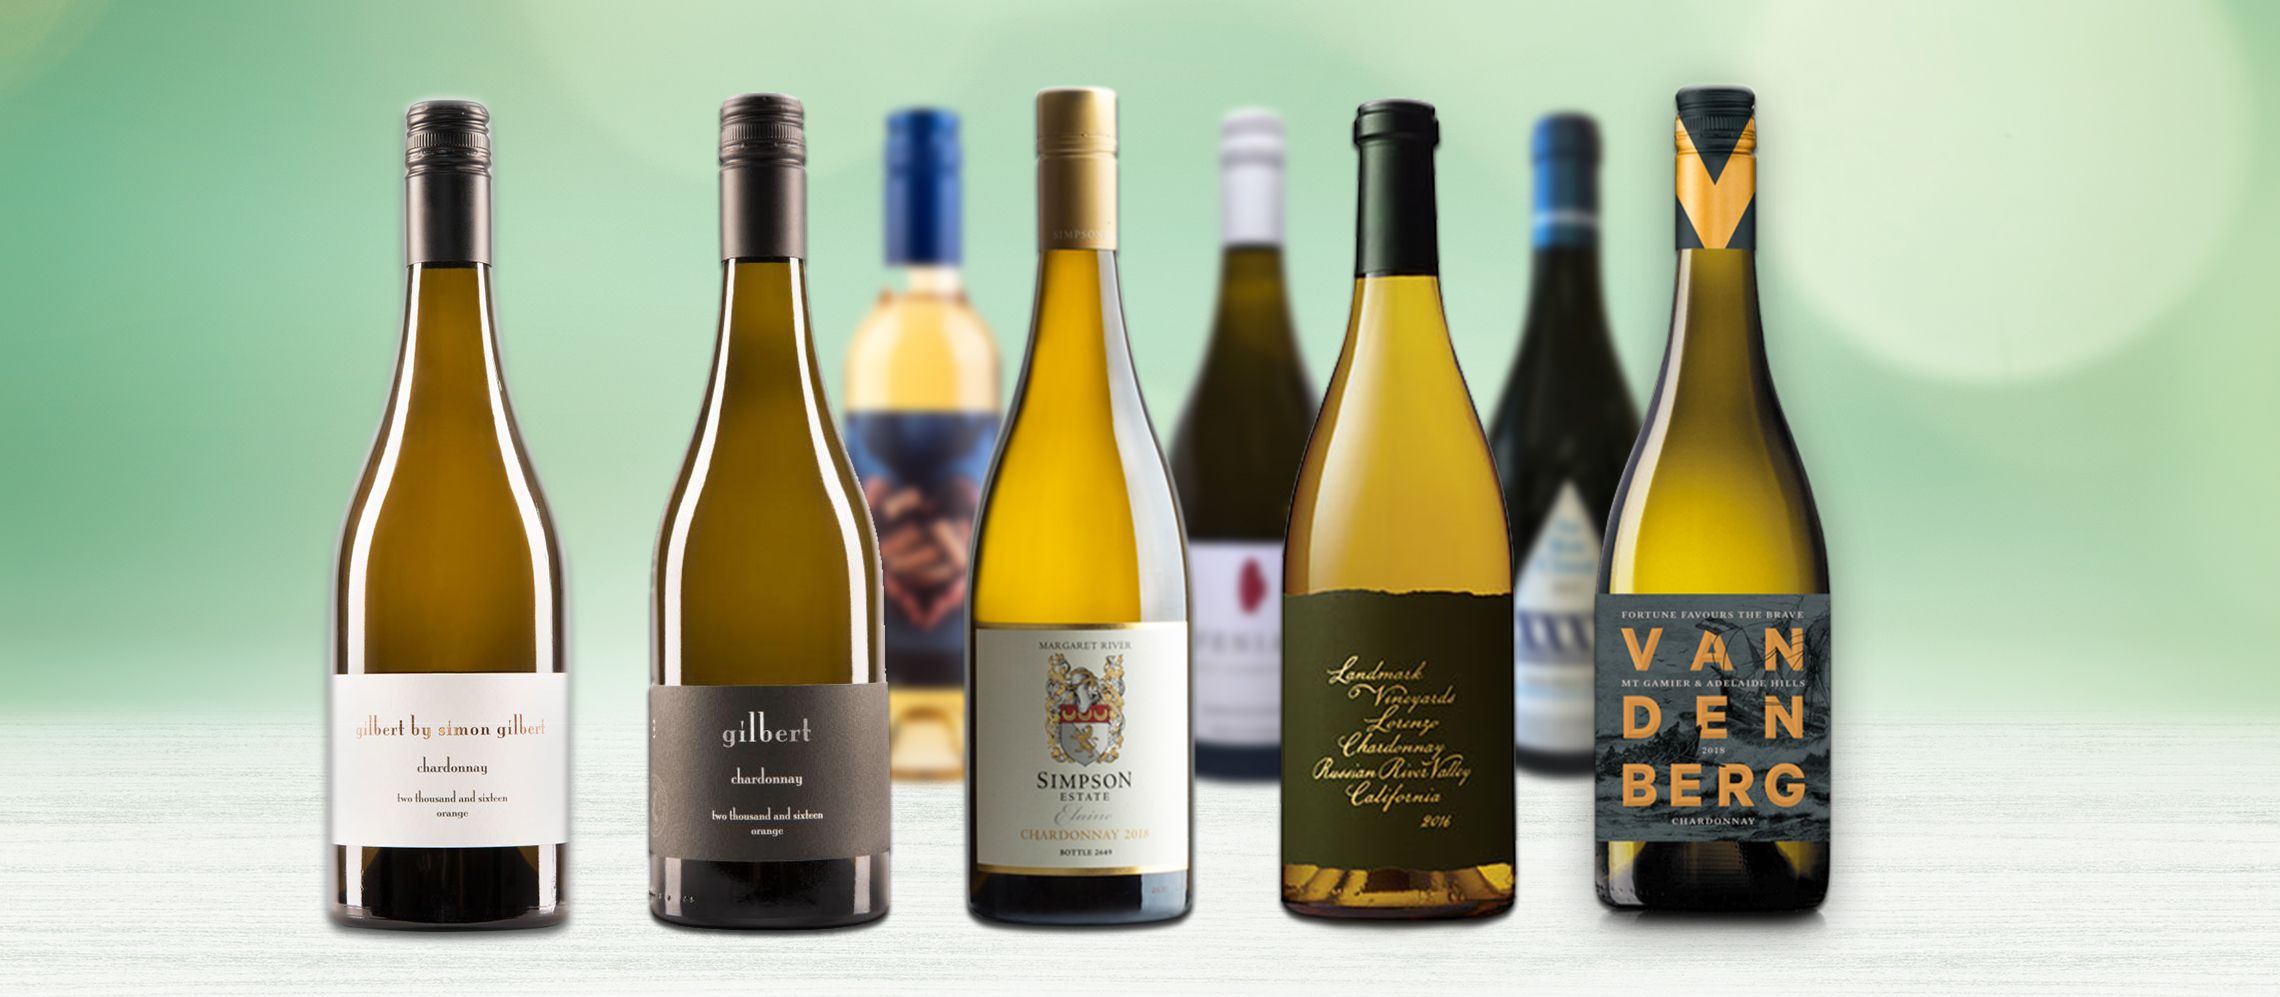 Photo for: 8 Best Chardonnay Wines to Try in 2019